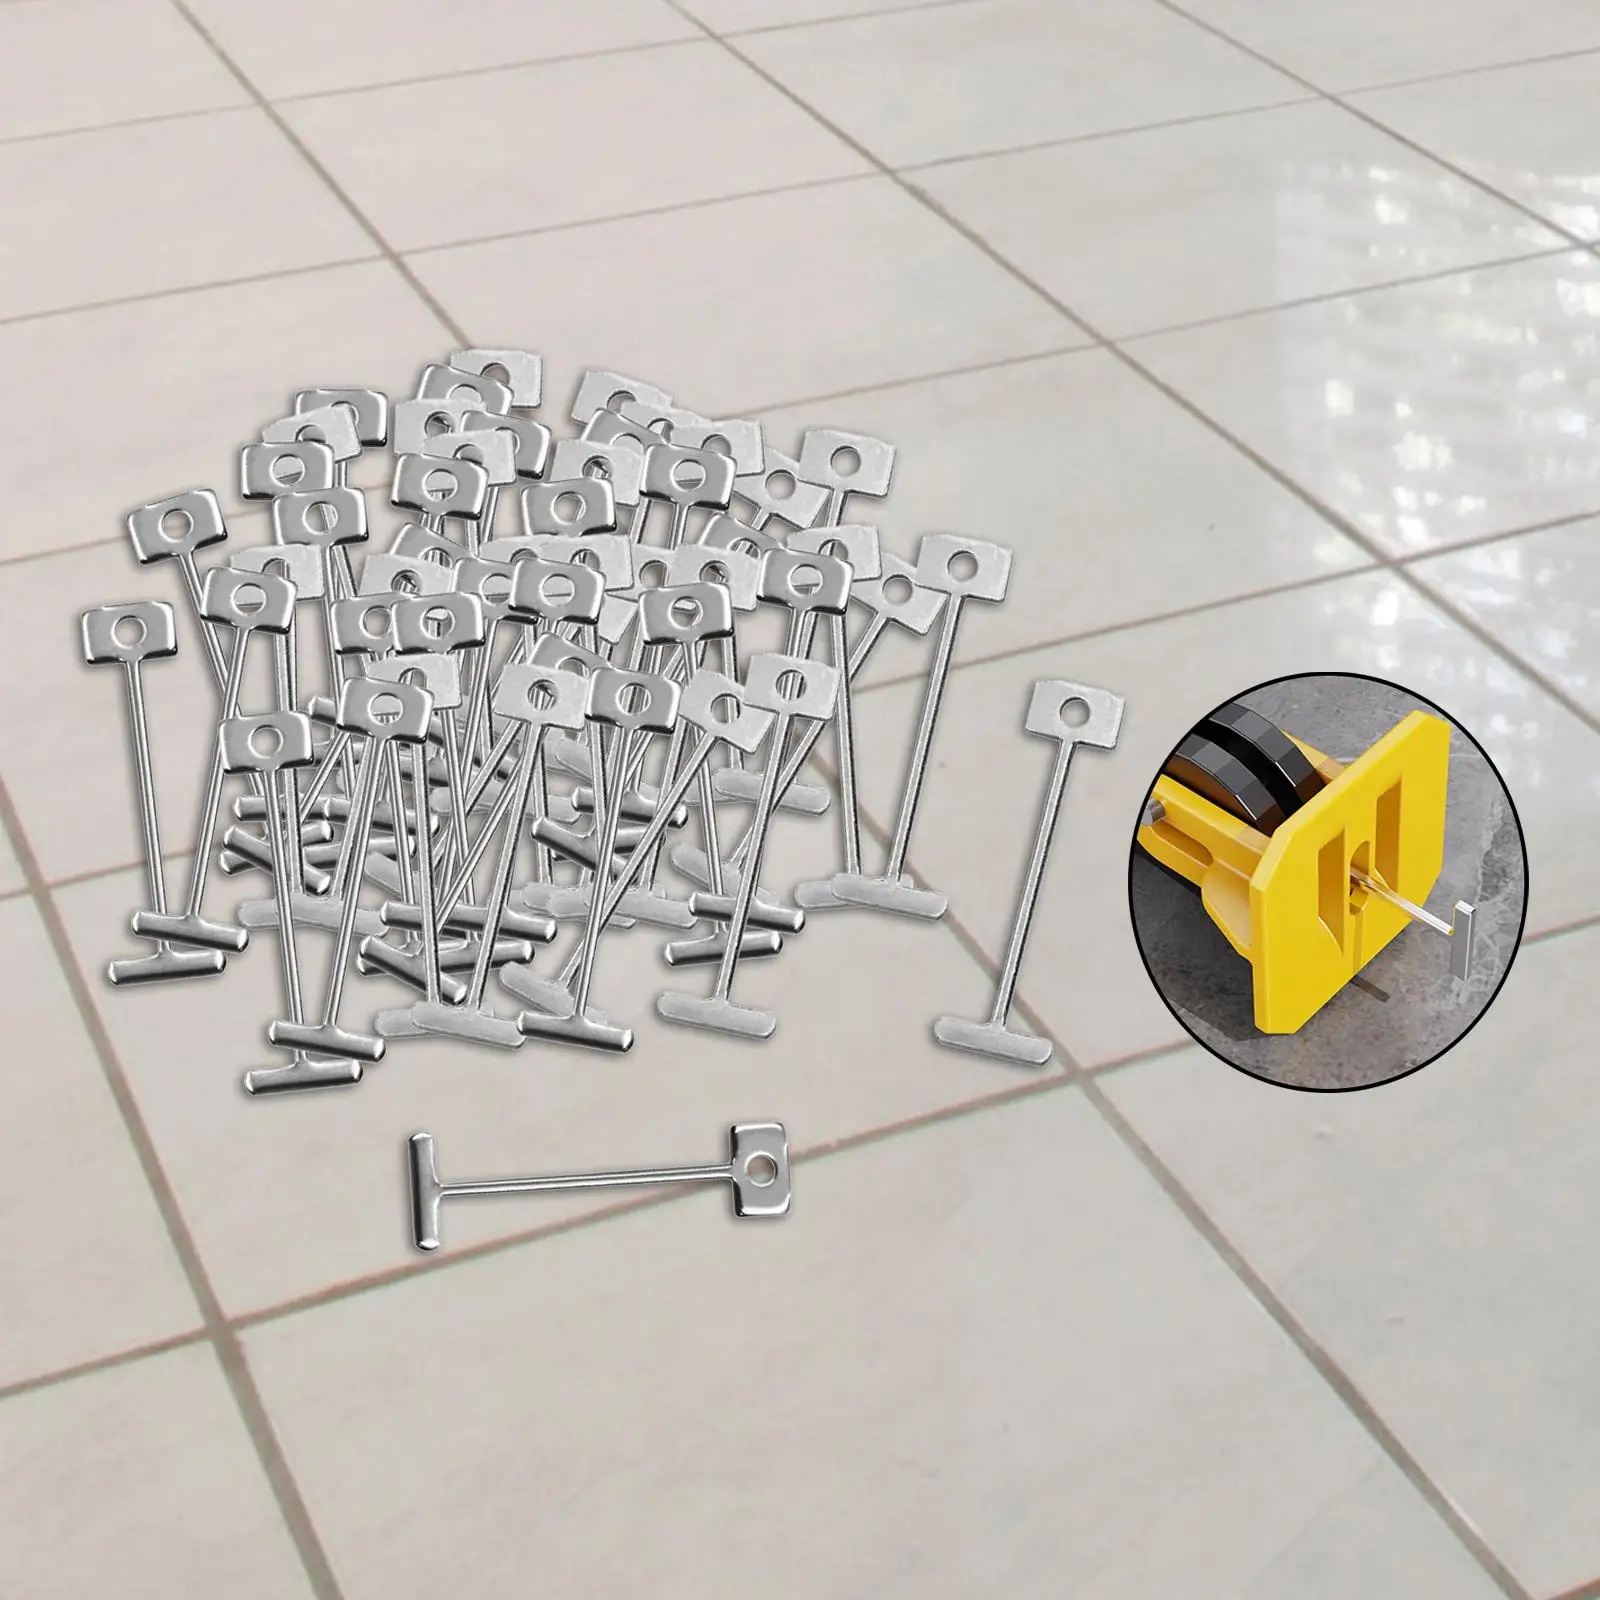 50Pcs Replacement Tile Leveling System T Pins for Builing Walls & Floors Tiling Construction Tools